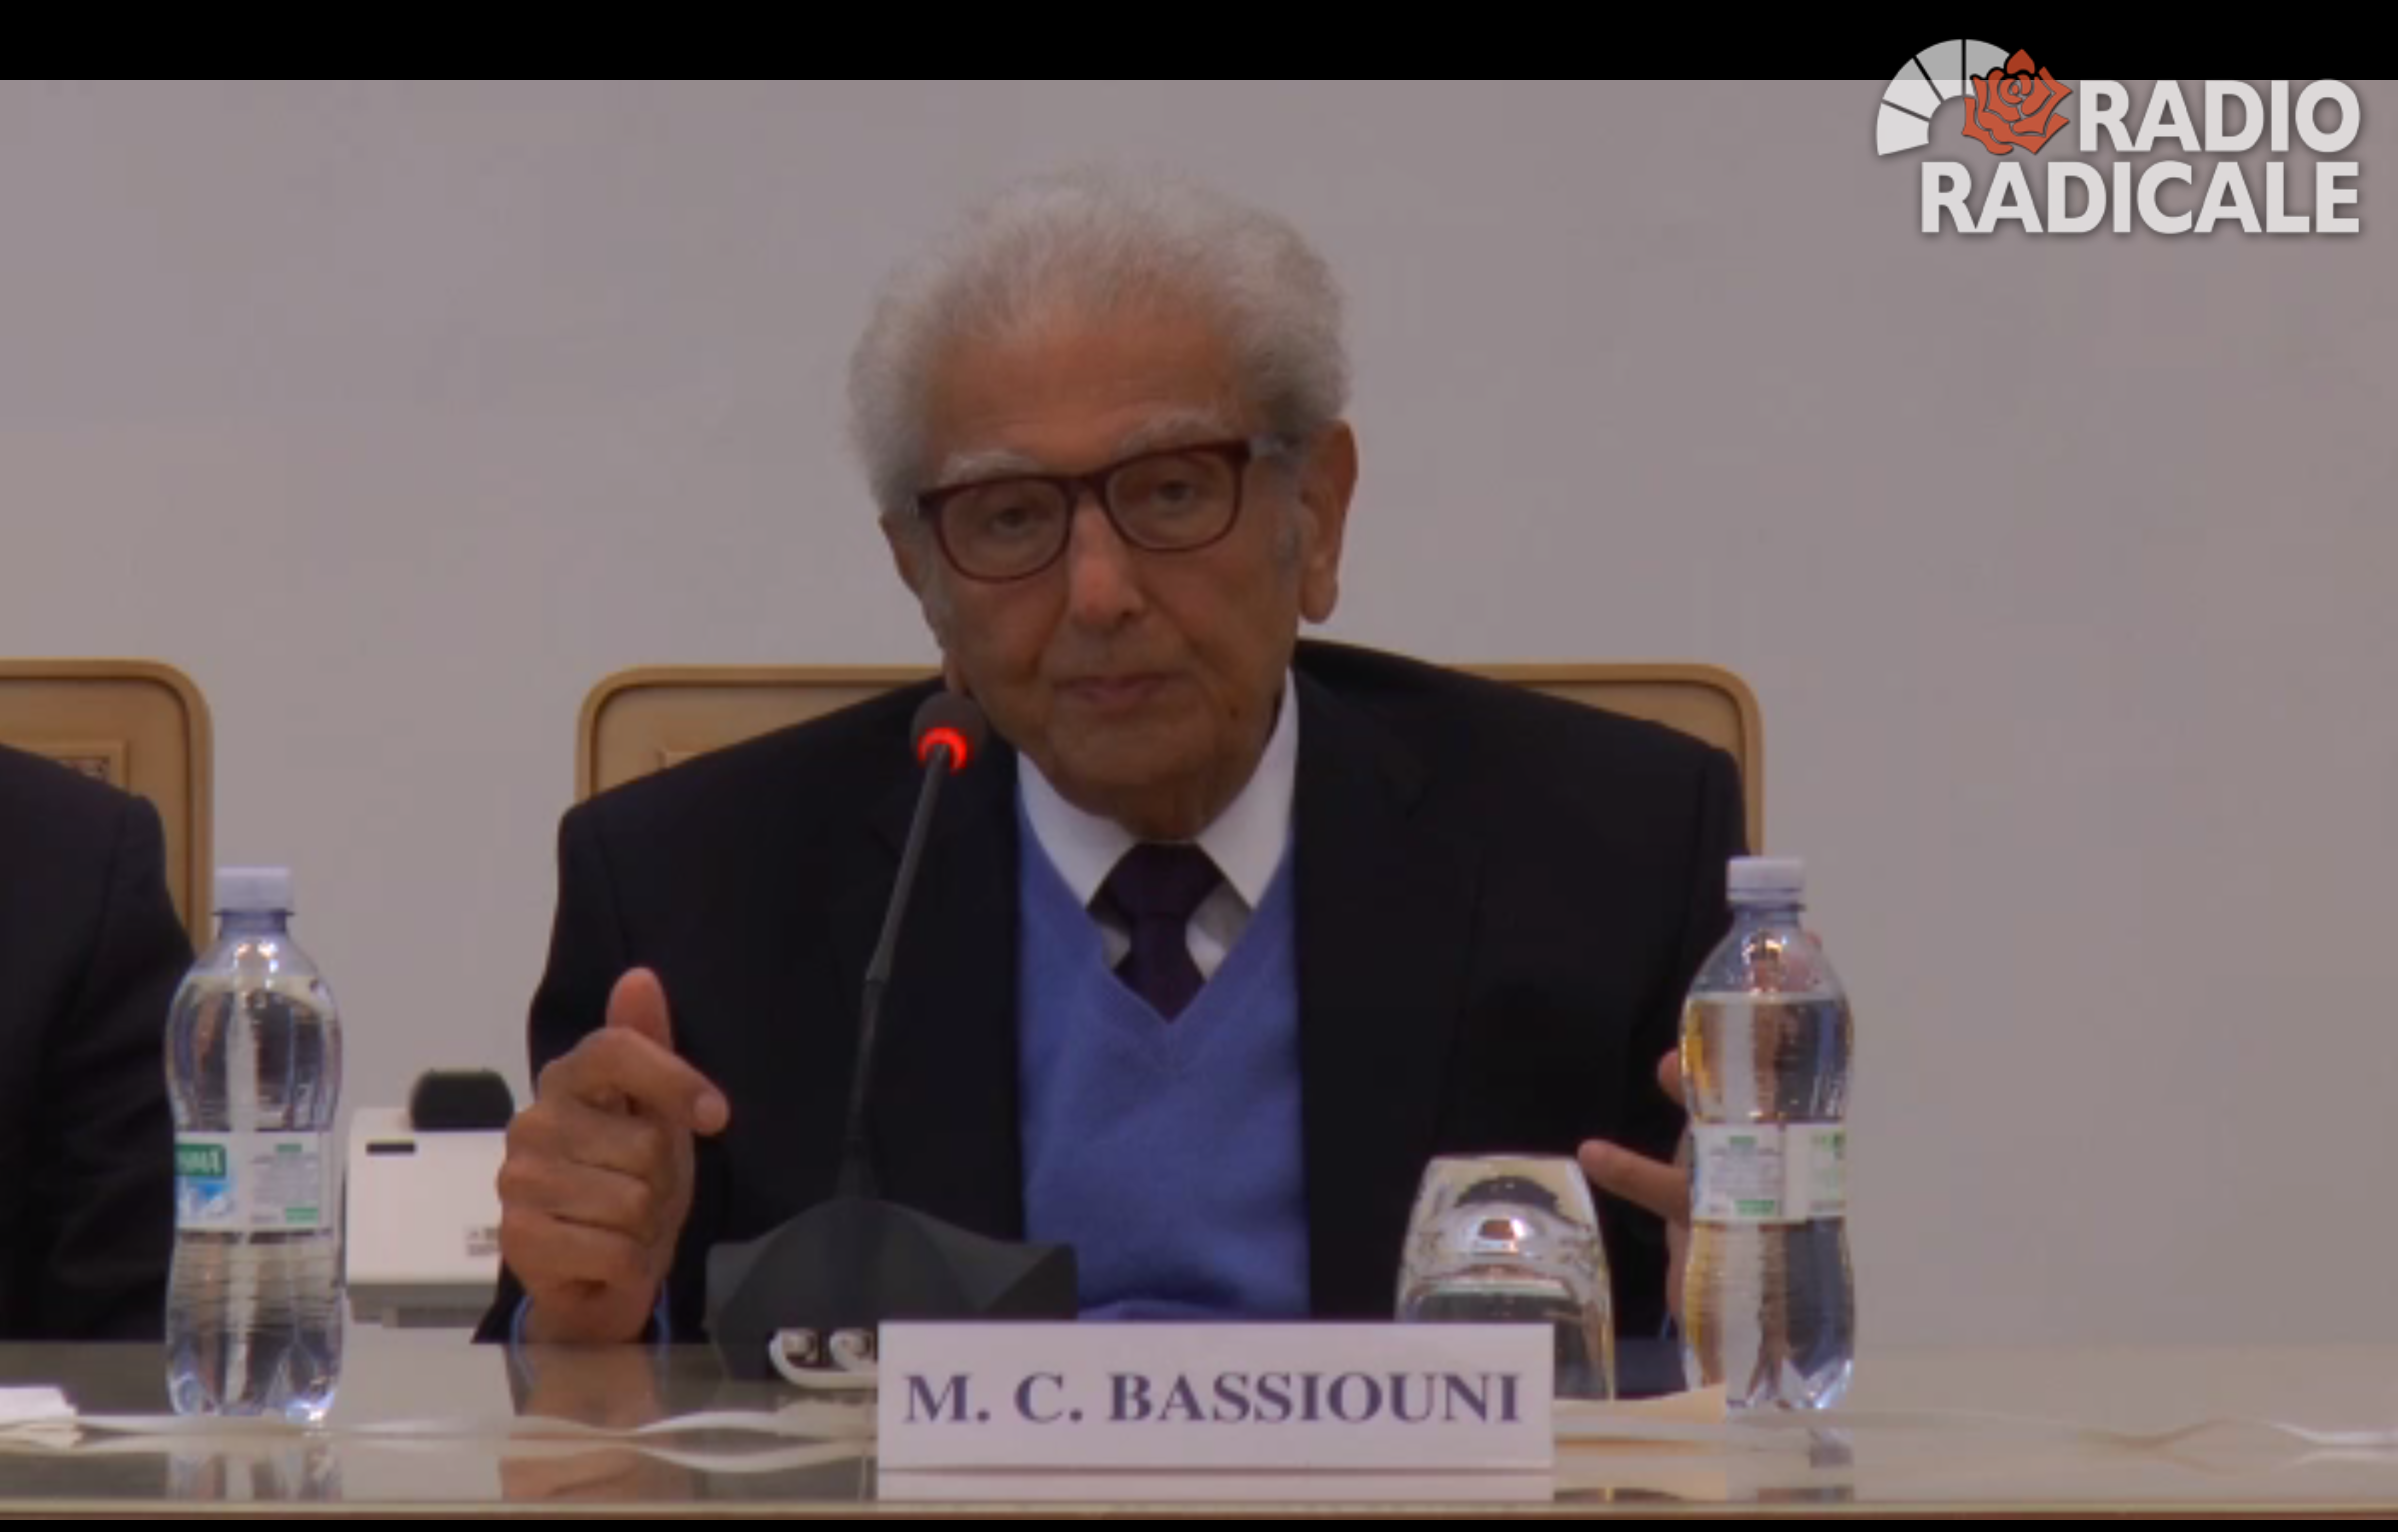 Cherif Bassiouni: we find ourselves on a radically different path than the one chosen in 1948